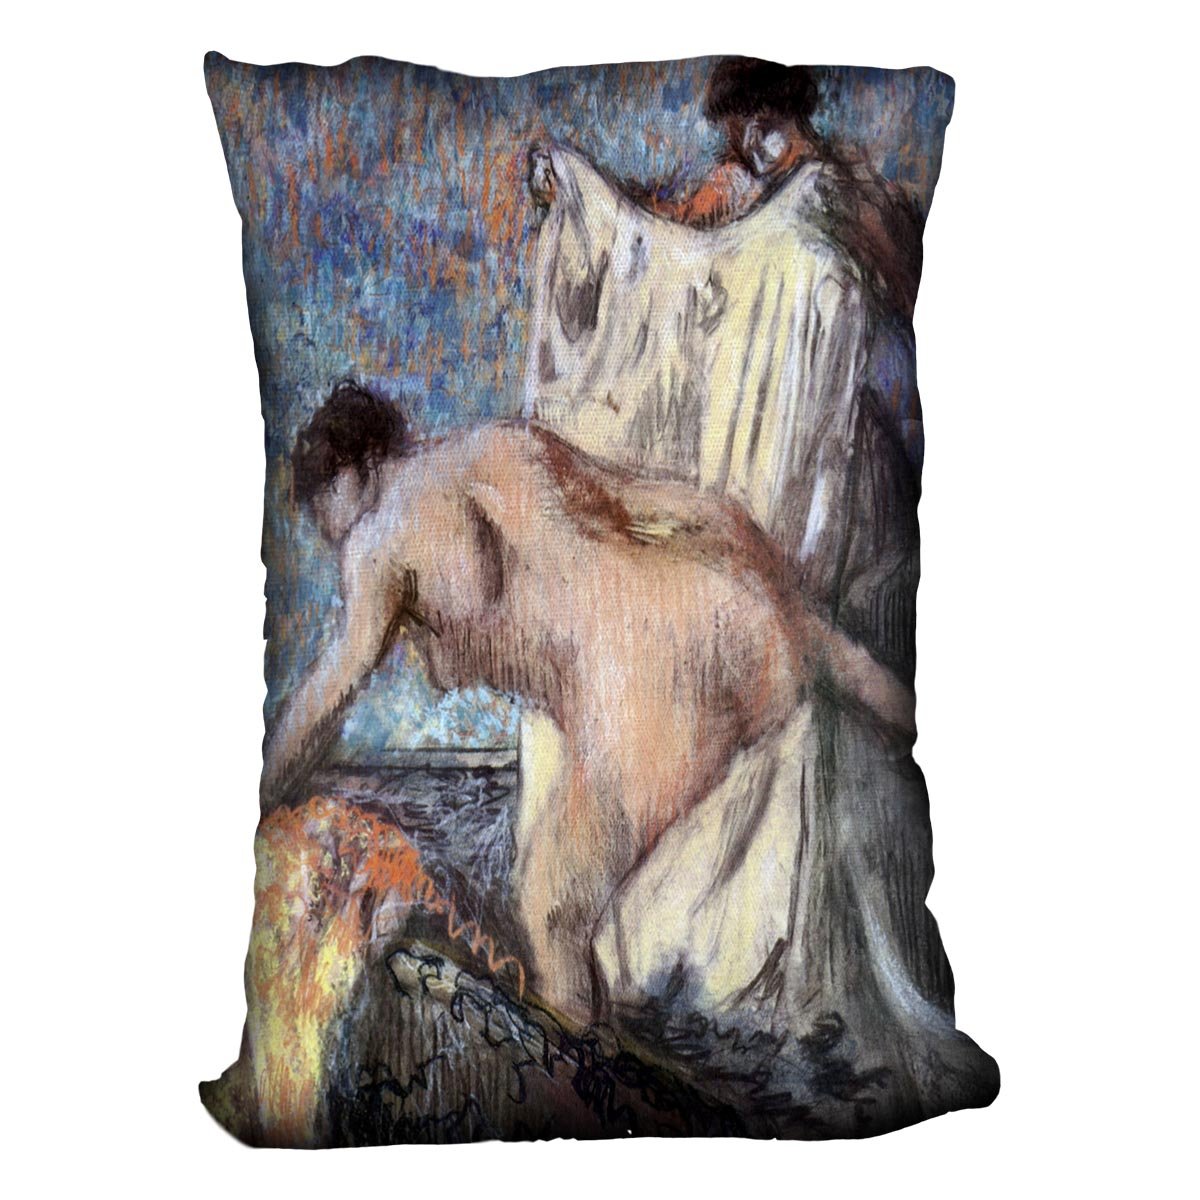 After bathing 3 by Degas Cushion